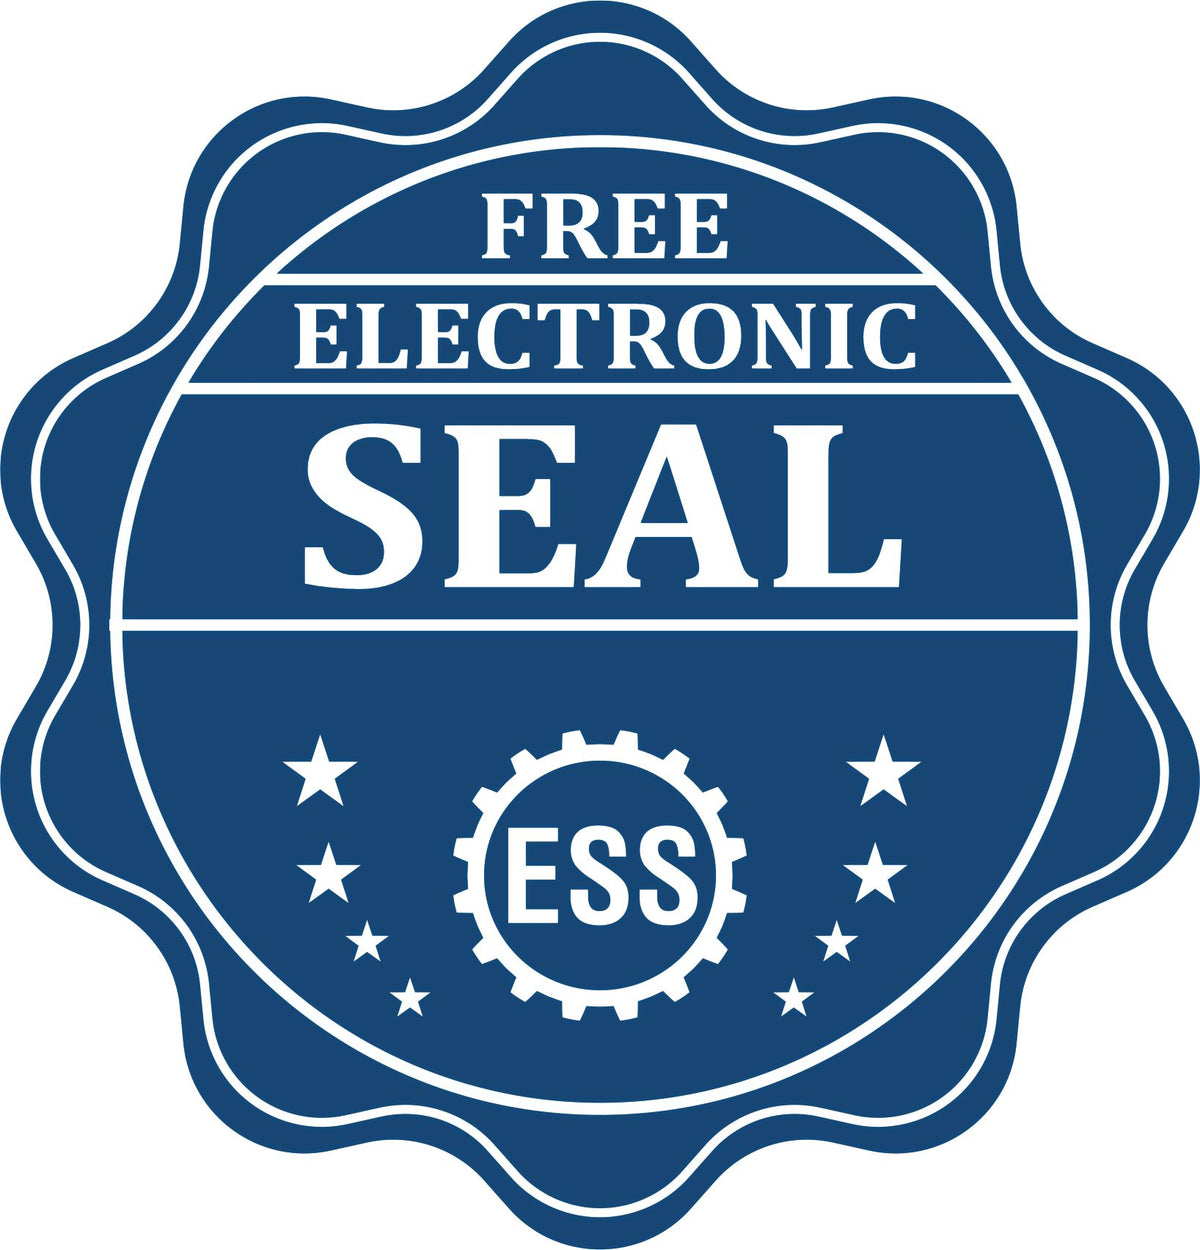 A badge showing a free electronic seal for the Heavy Duty Cast Iron Wyoming Architect Embosser with stars and the ESS gear on the emblem.